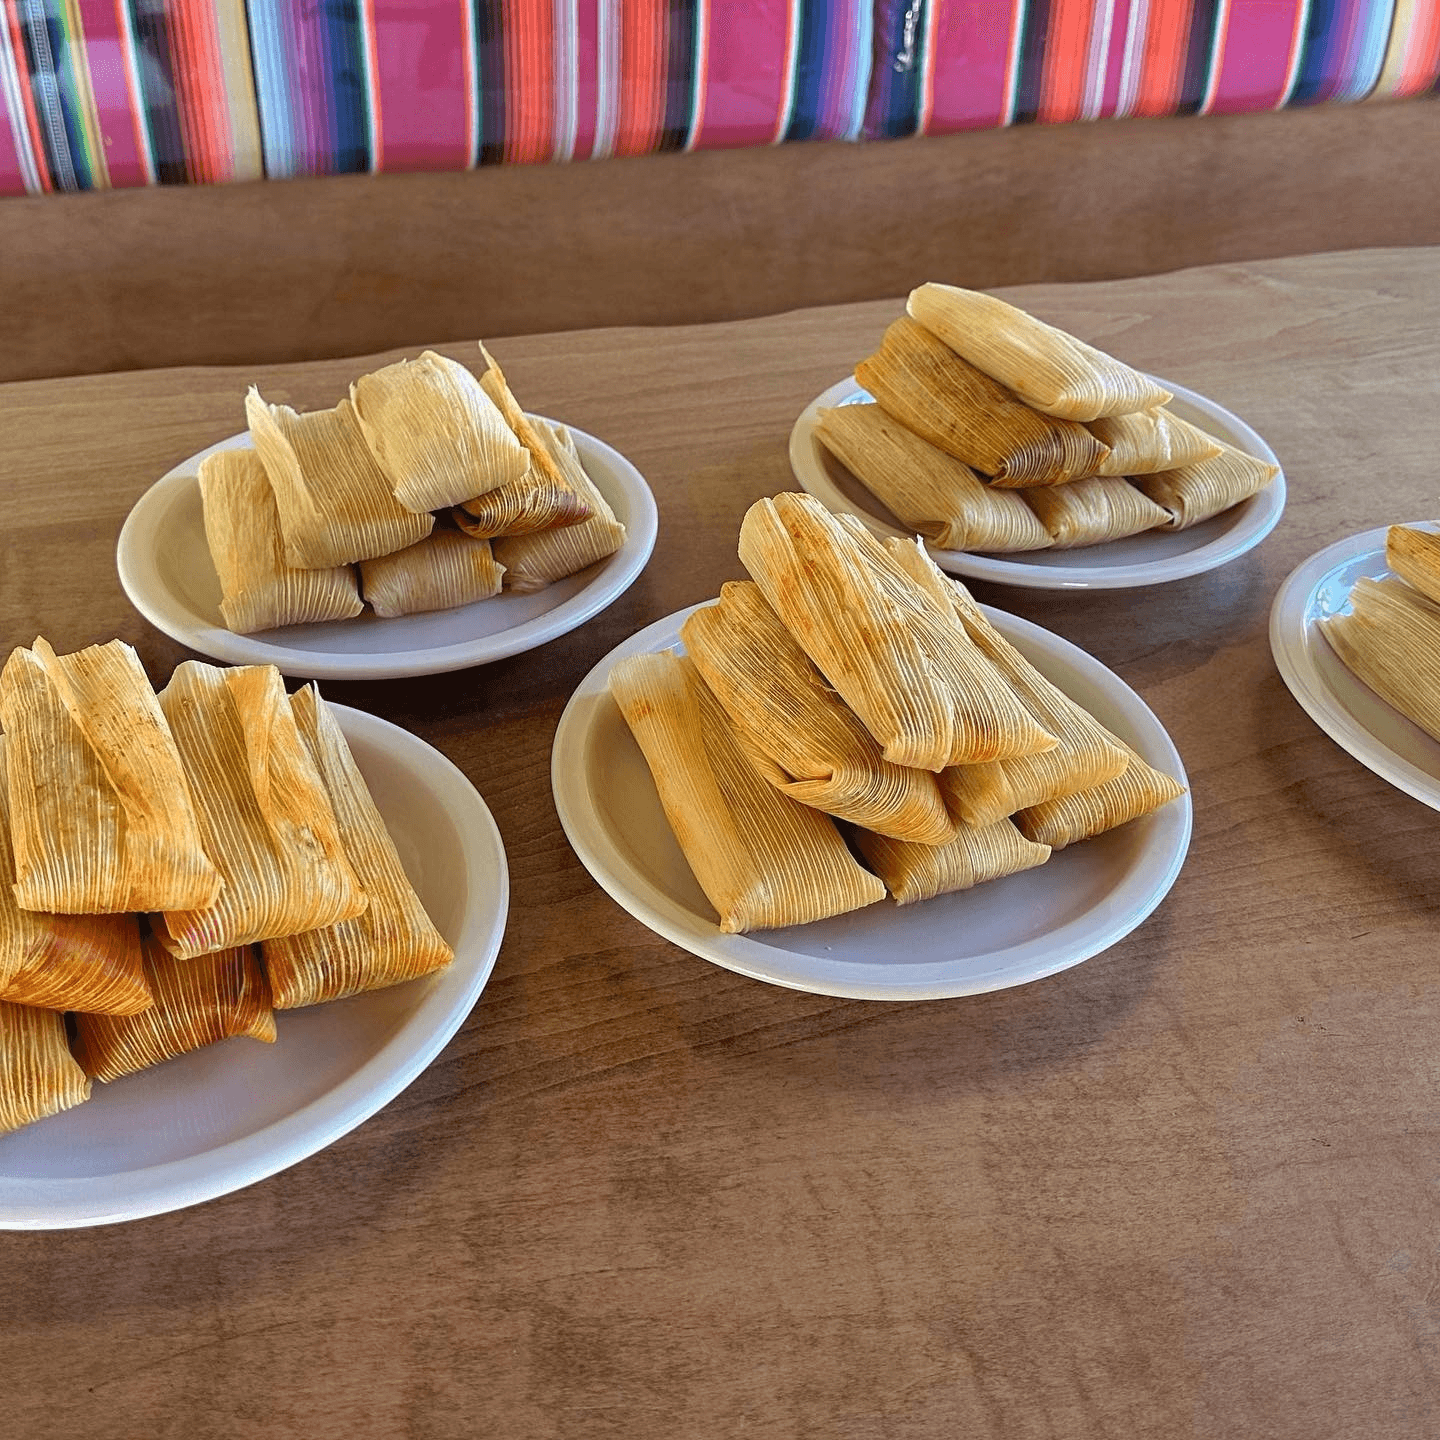 Our Tamales